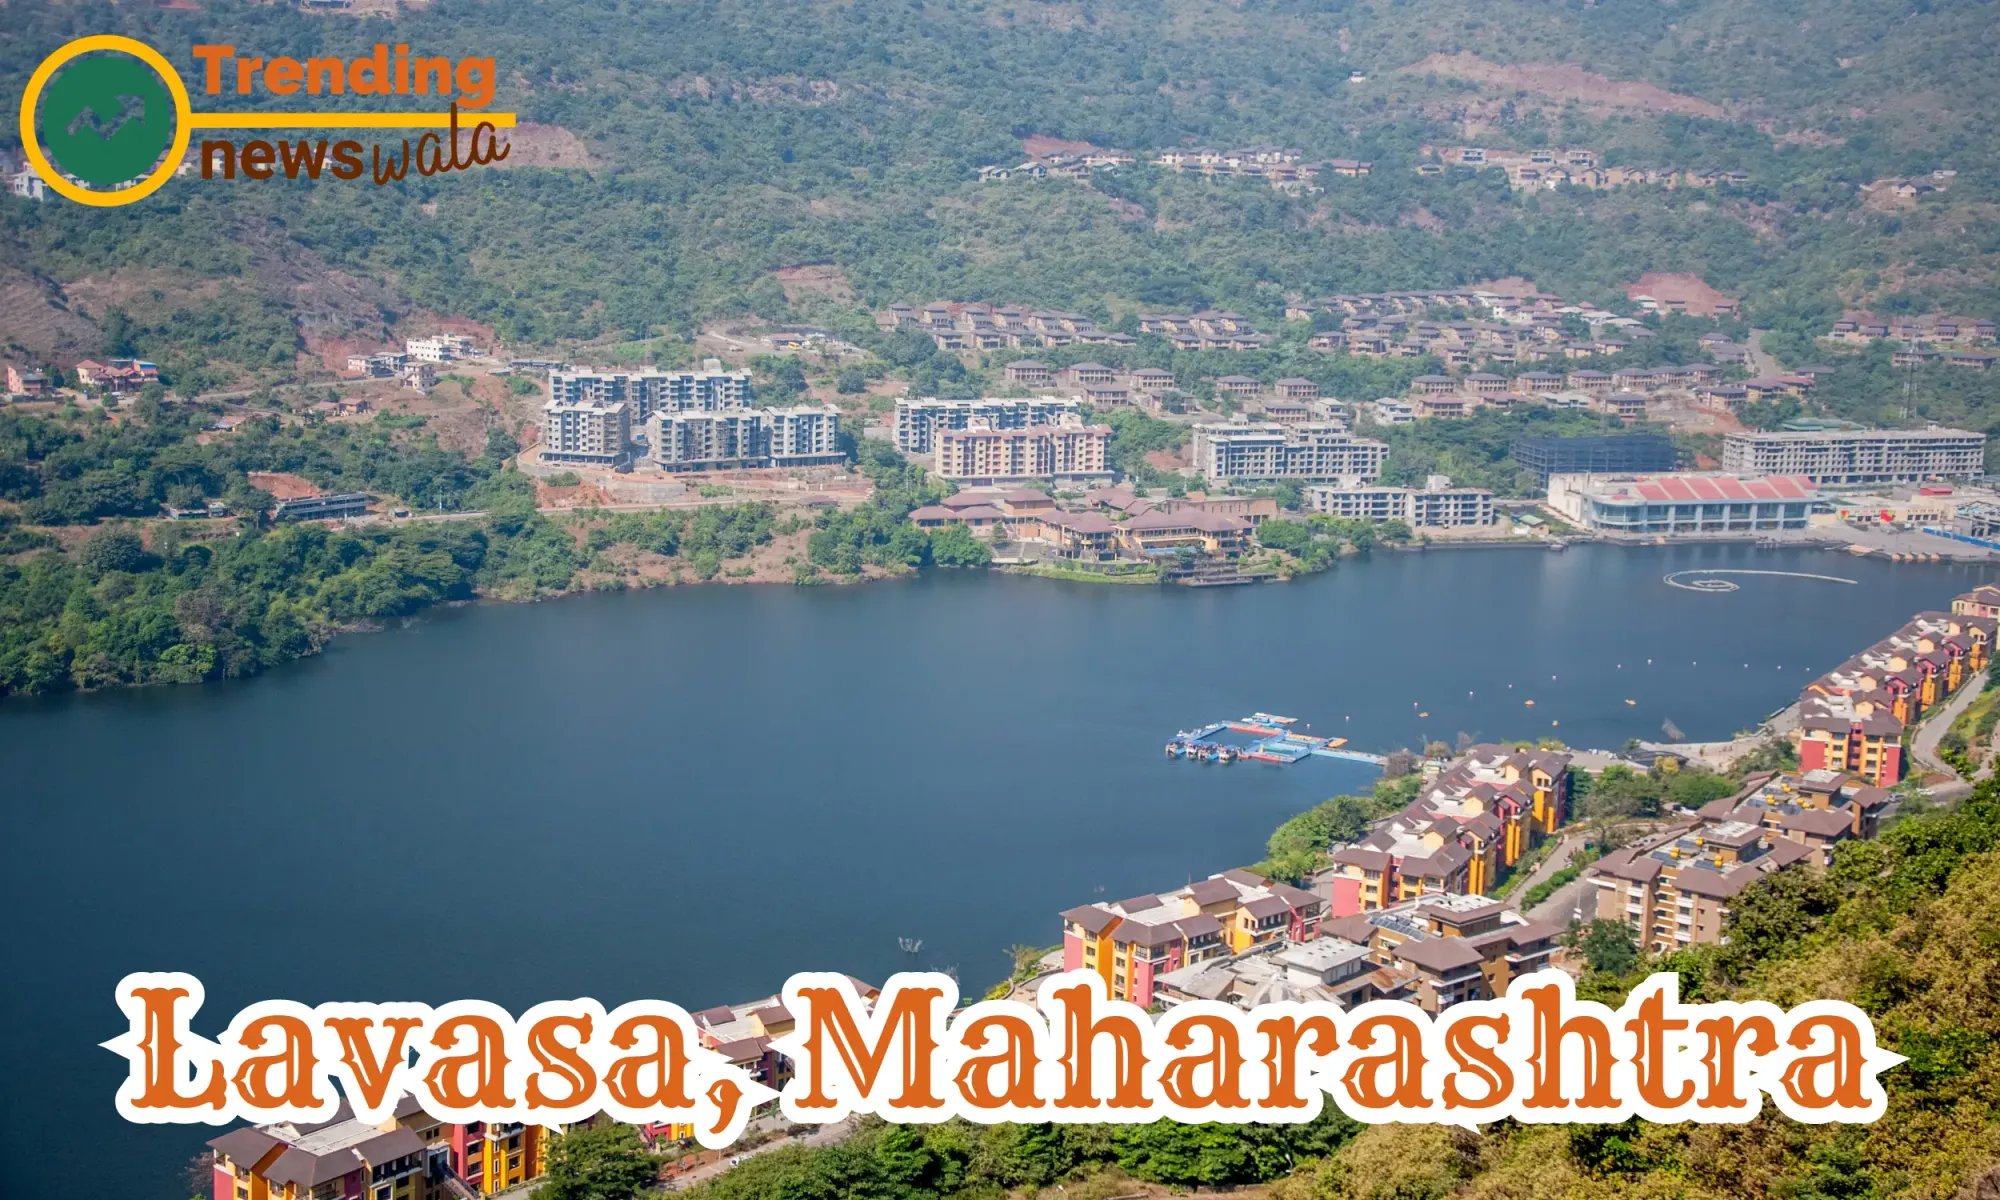 Lavasa is a planned hill station and city located in the Western Ghats of Maharashtra, India